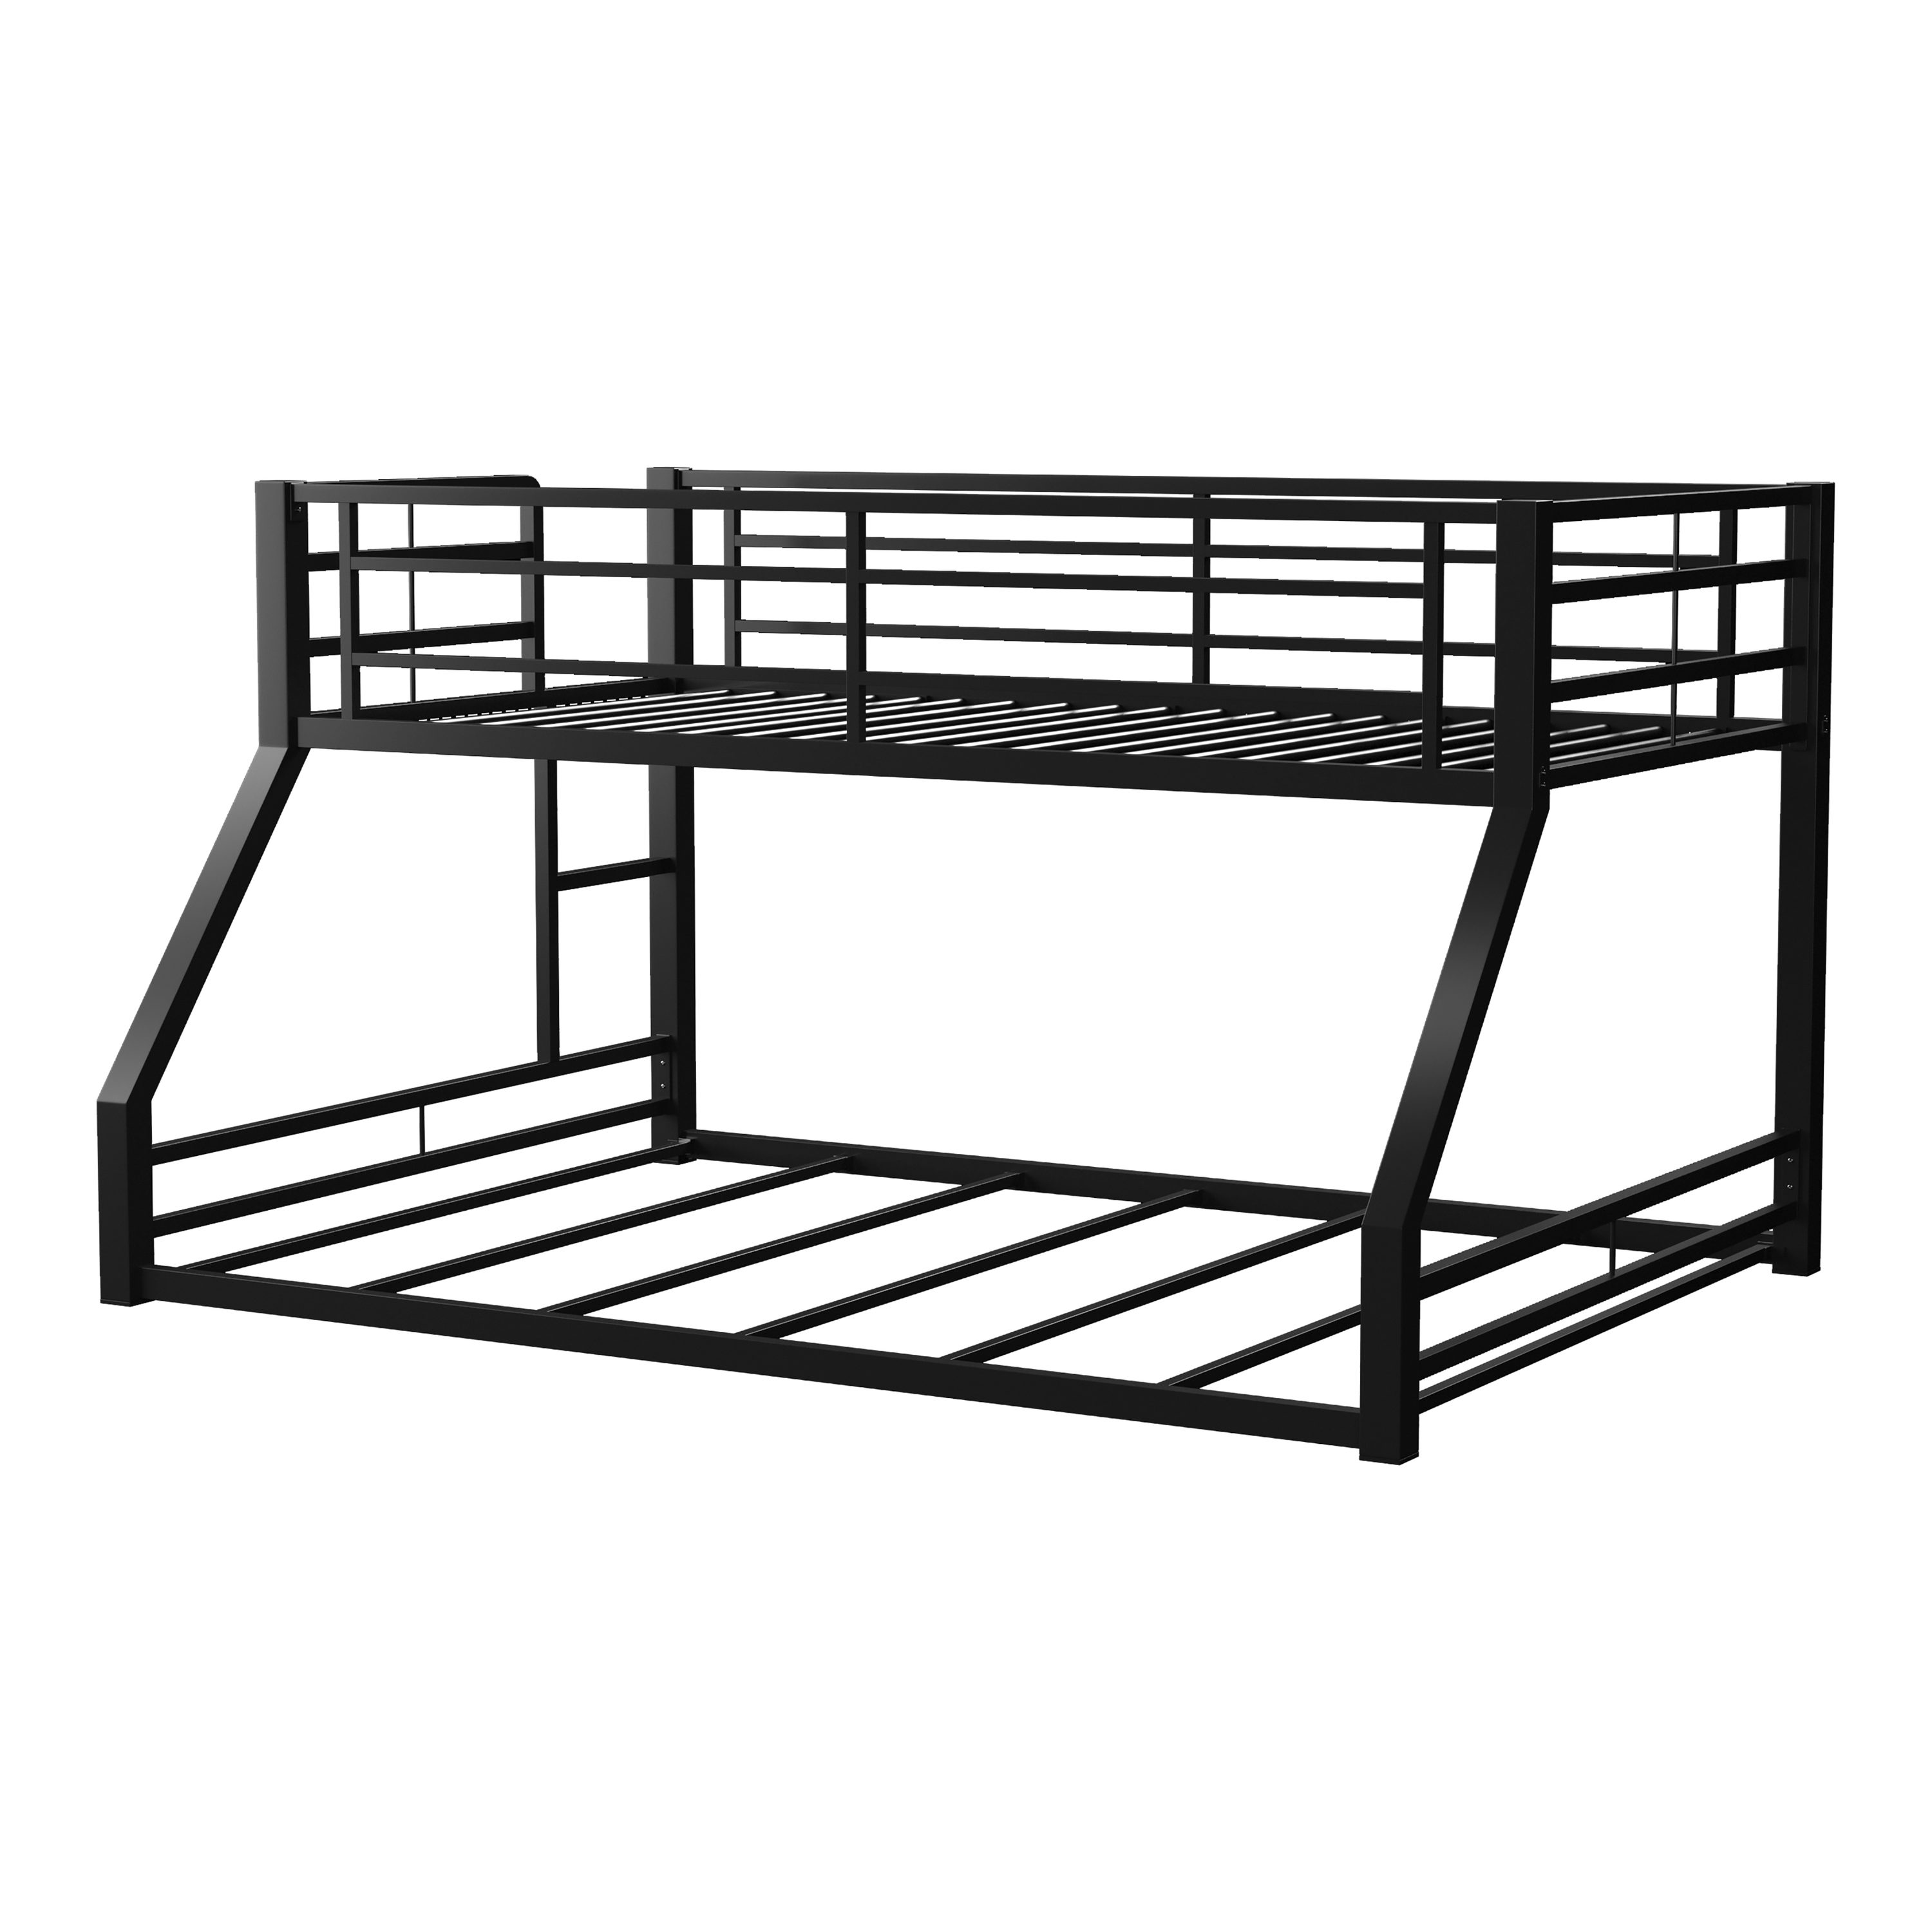 Full Bunk Bed In The Beds, Black Twin Full Bunk Bed